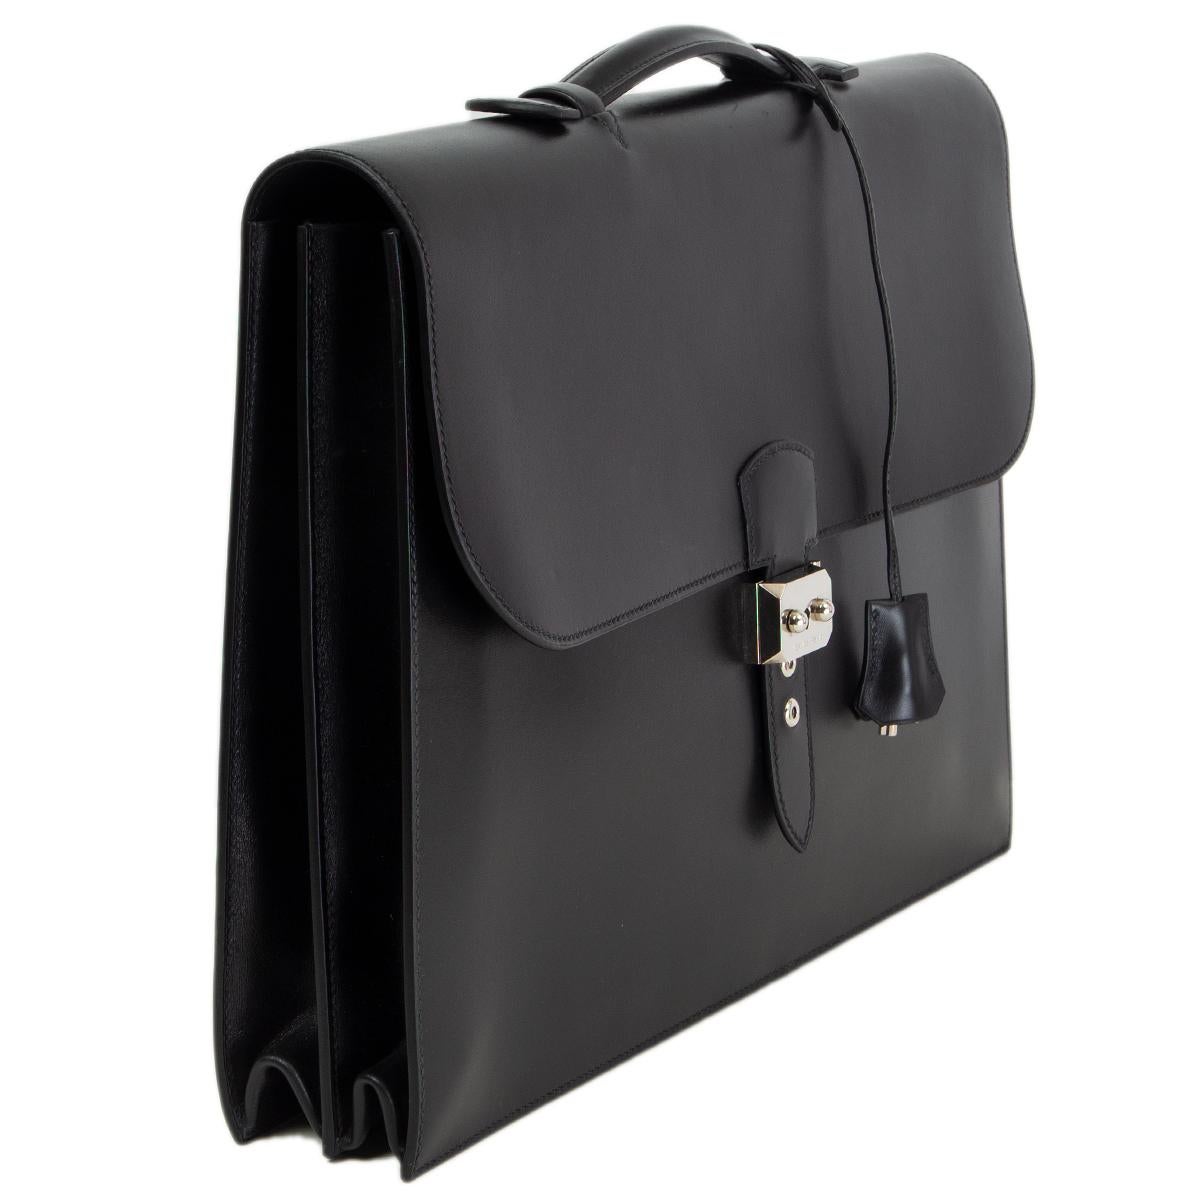 100% authentic Hermès Sac a Depeches 2-41 briefcase in noir Veau Box featuring Palladium flip-lock buckle. Interior is lined in noir Veau Box and has two main compartments and a big flat pocket at front. Has been carried once or twice and is in